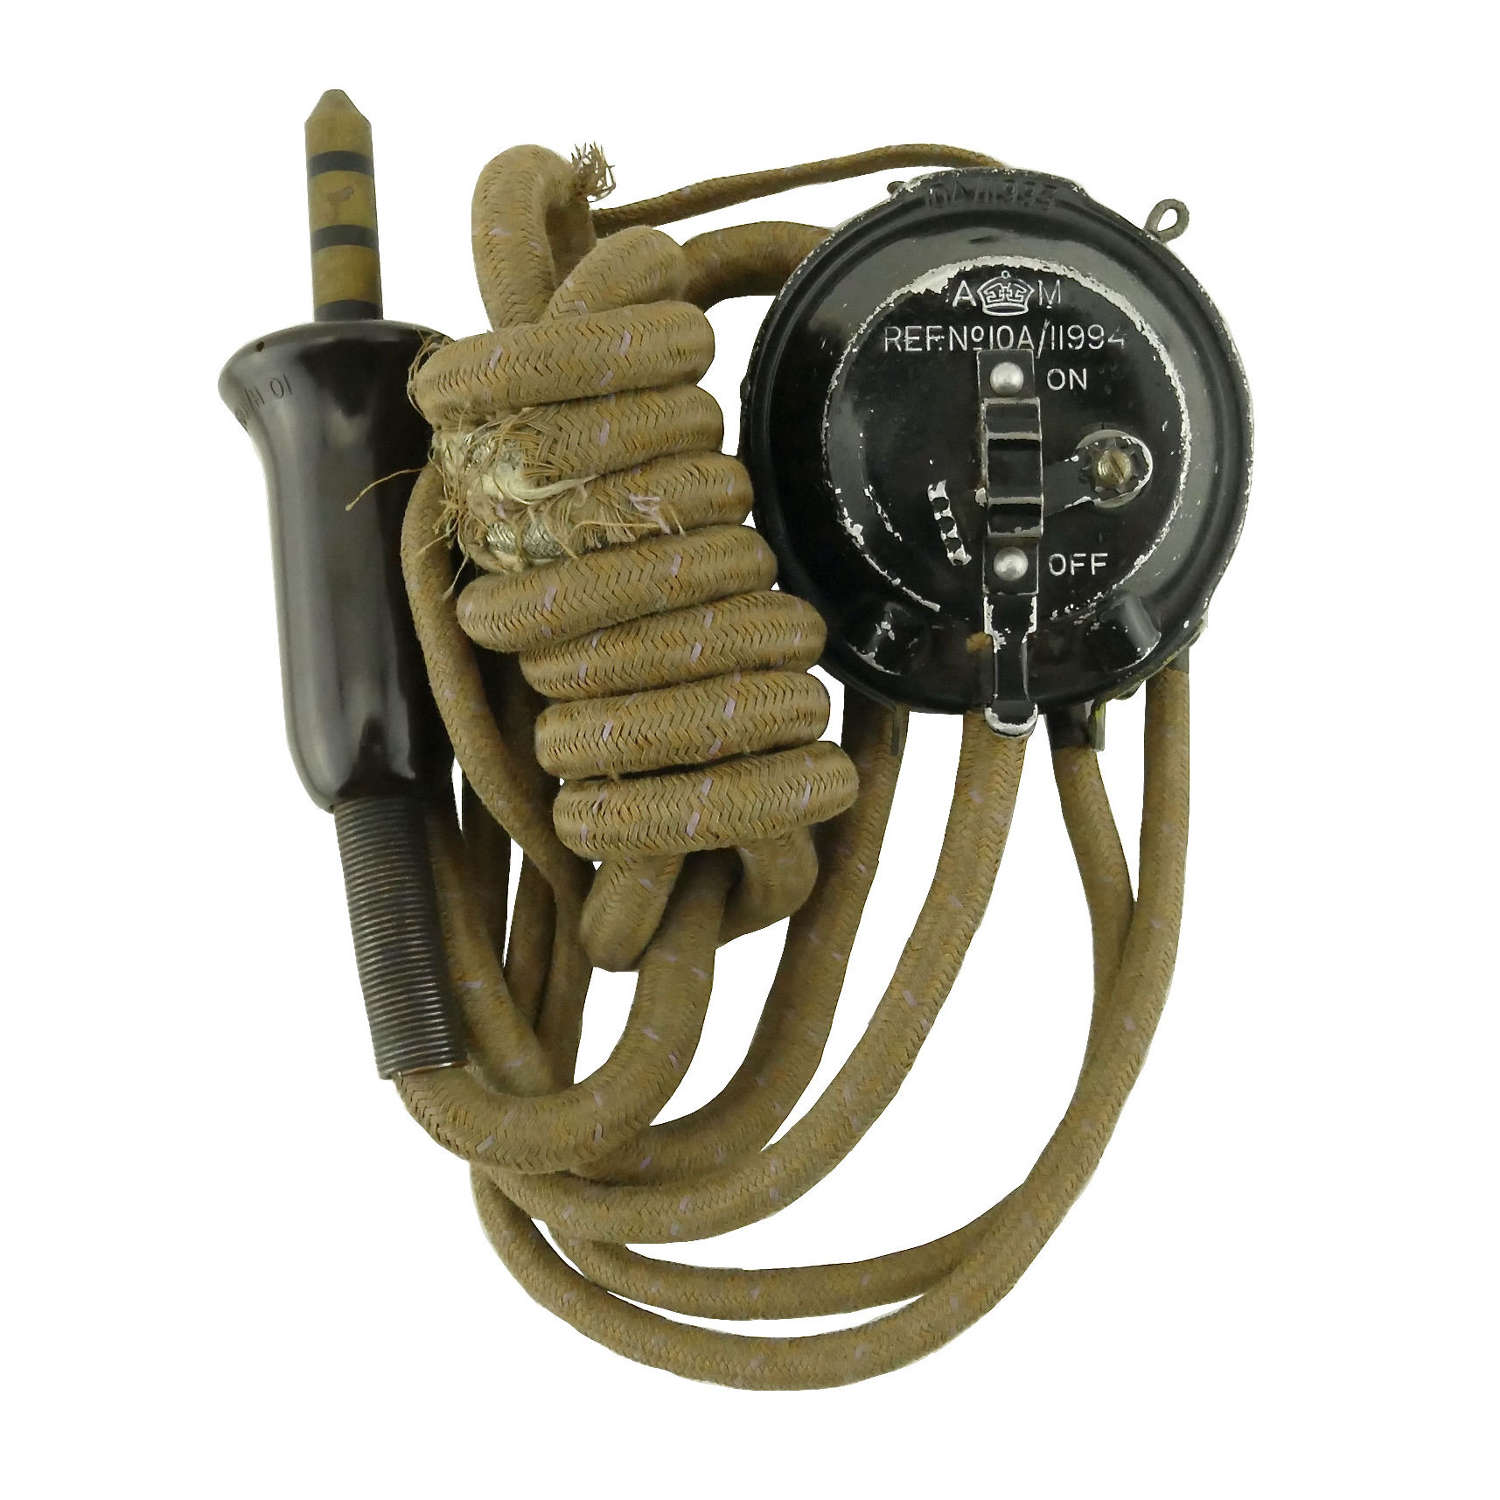 RAF external wiring loom with attached type 20 microphone